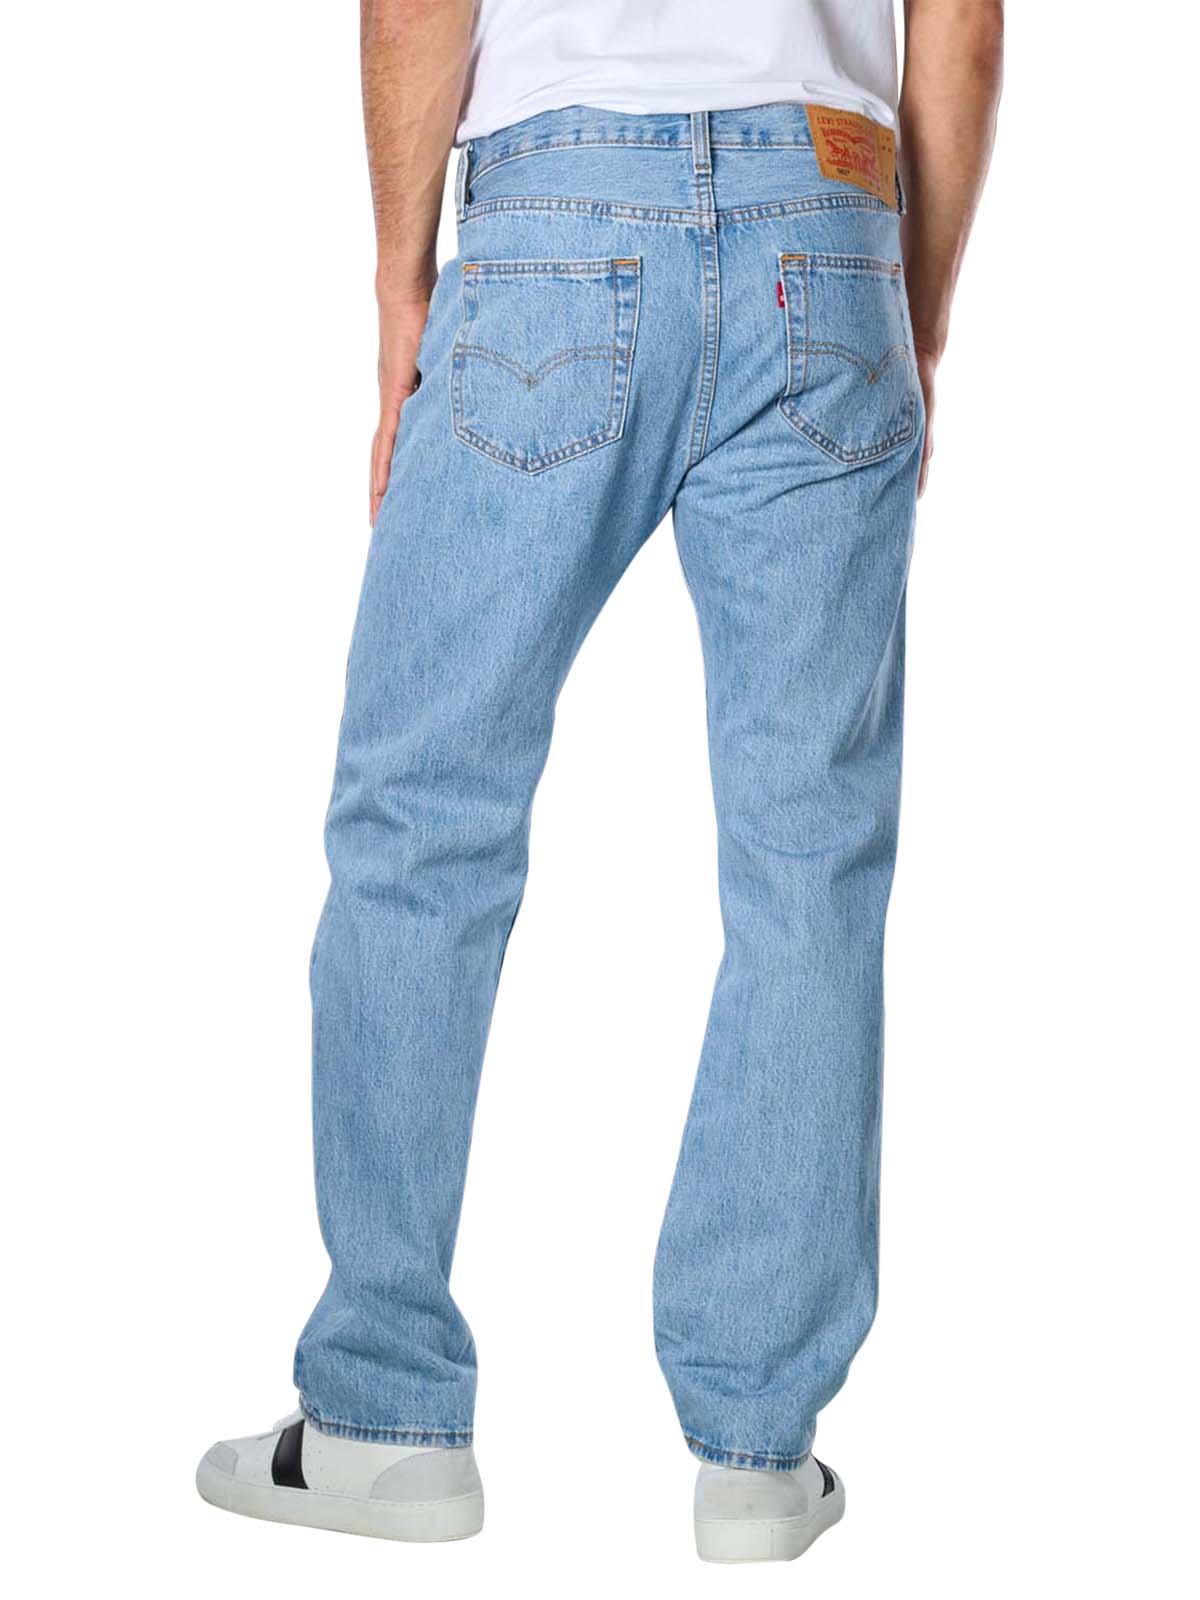 Levi's 501 Jeans light stonewash Levi's Men's Jeans | Free Shipping on   - SIMPLY LOOK GOOD